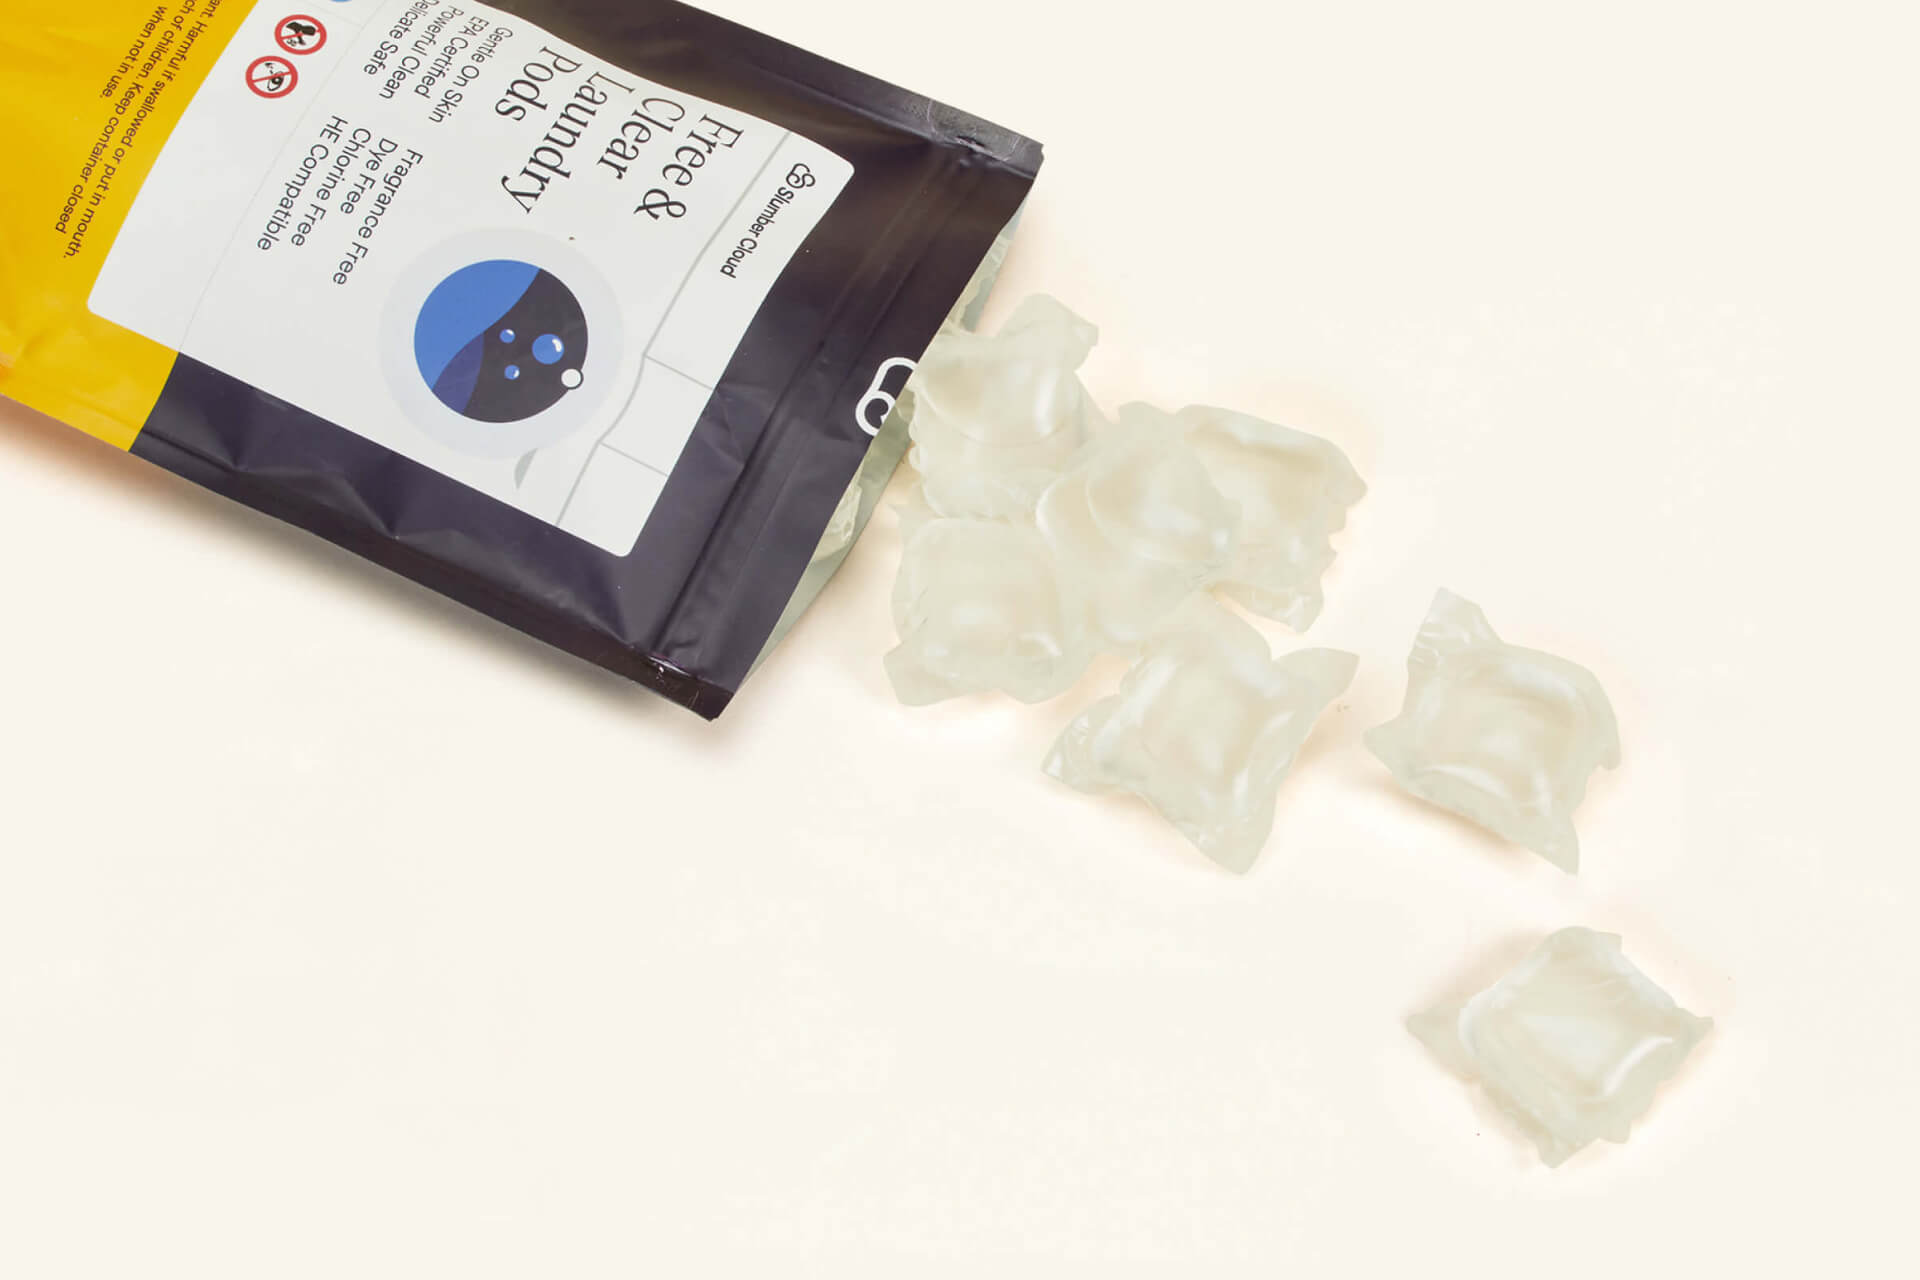 Slumber Cloud Free & Clear Laundry Pods spilling out of their zip top bag